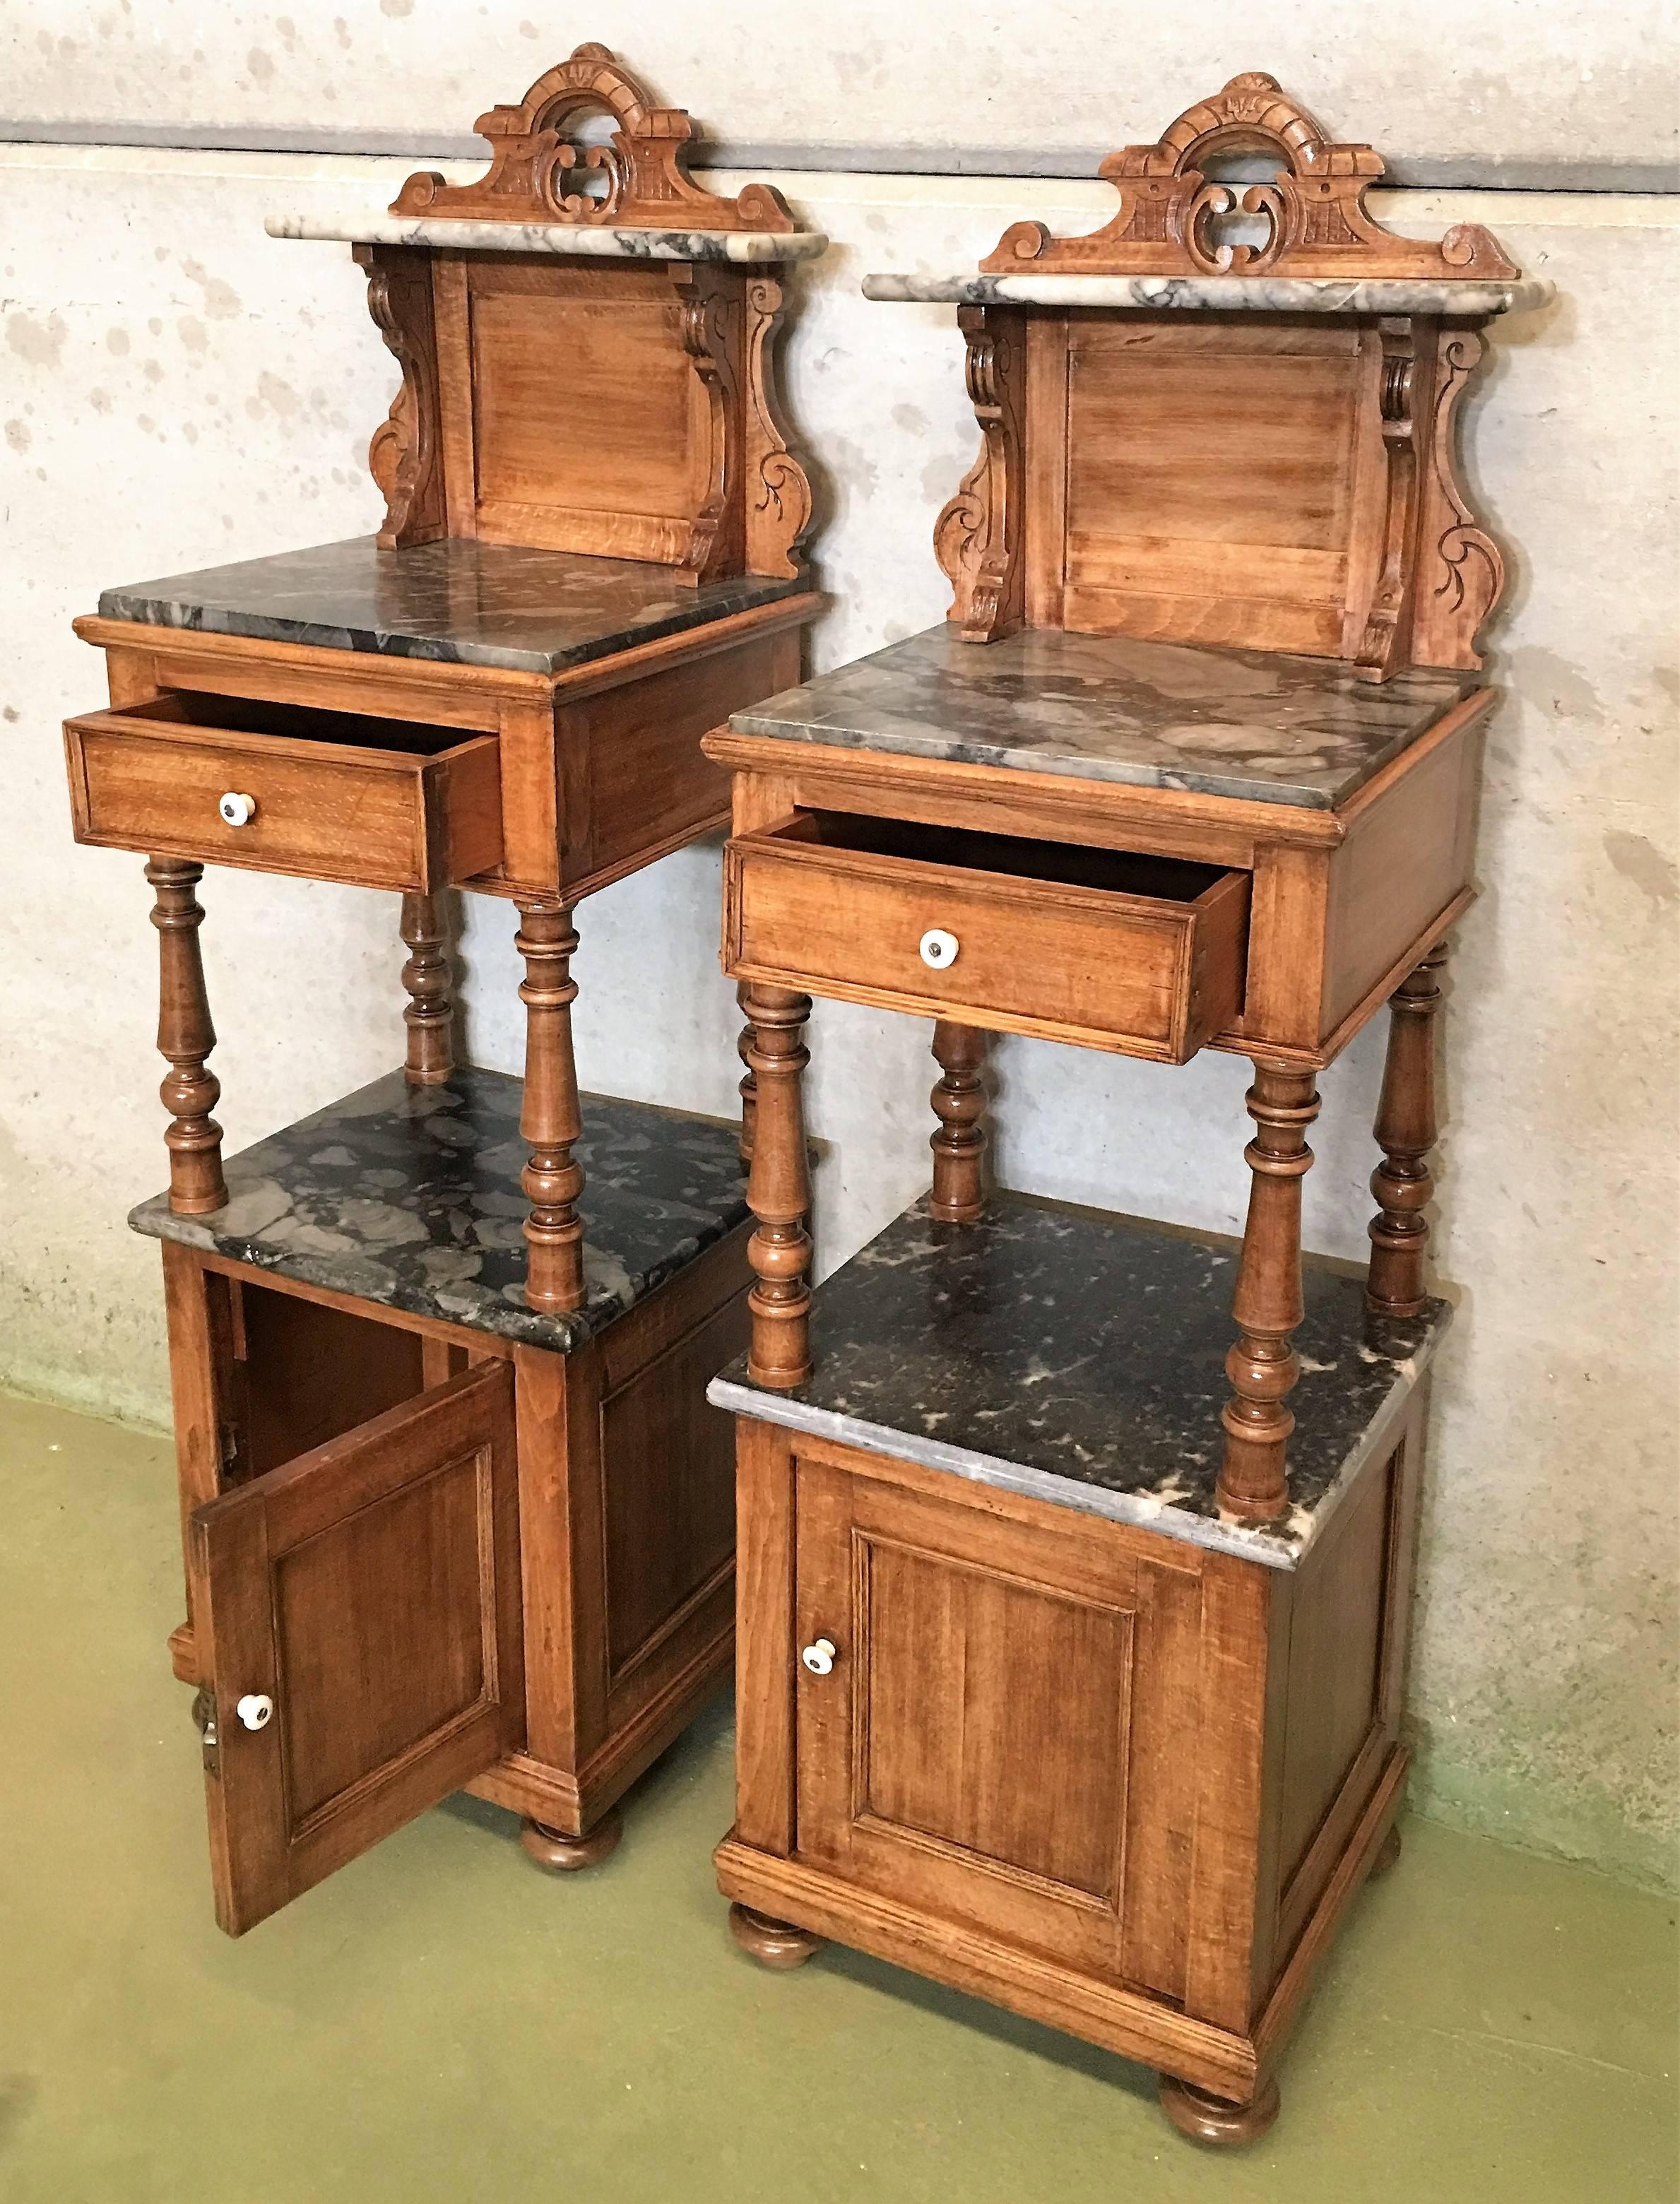 Elegant and beautiful quality antique nightstands.

This handcrafted early 20th century pair of bedside cabinets is in used, but good condition. The patina and the patterns in the wood are second to none and the color differences of the corners